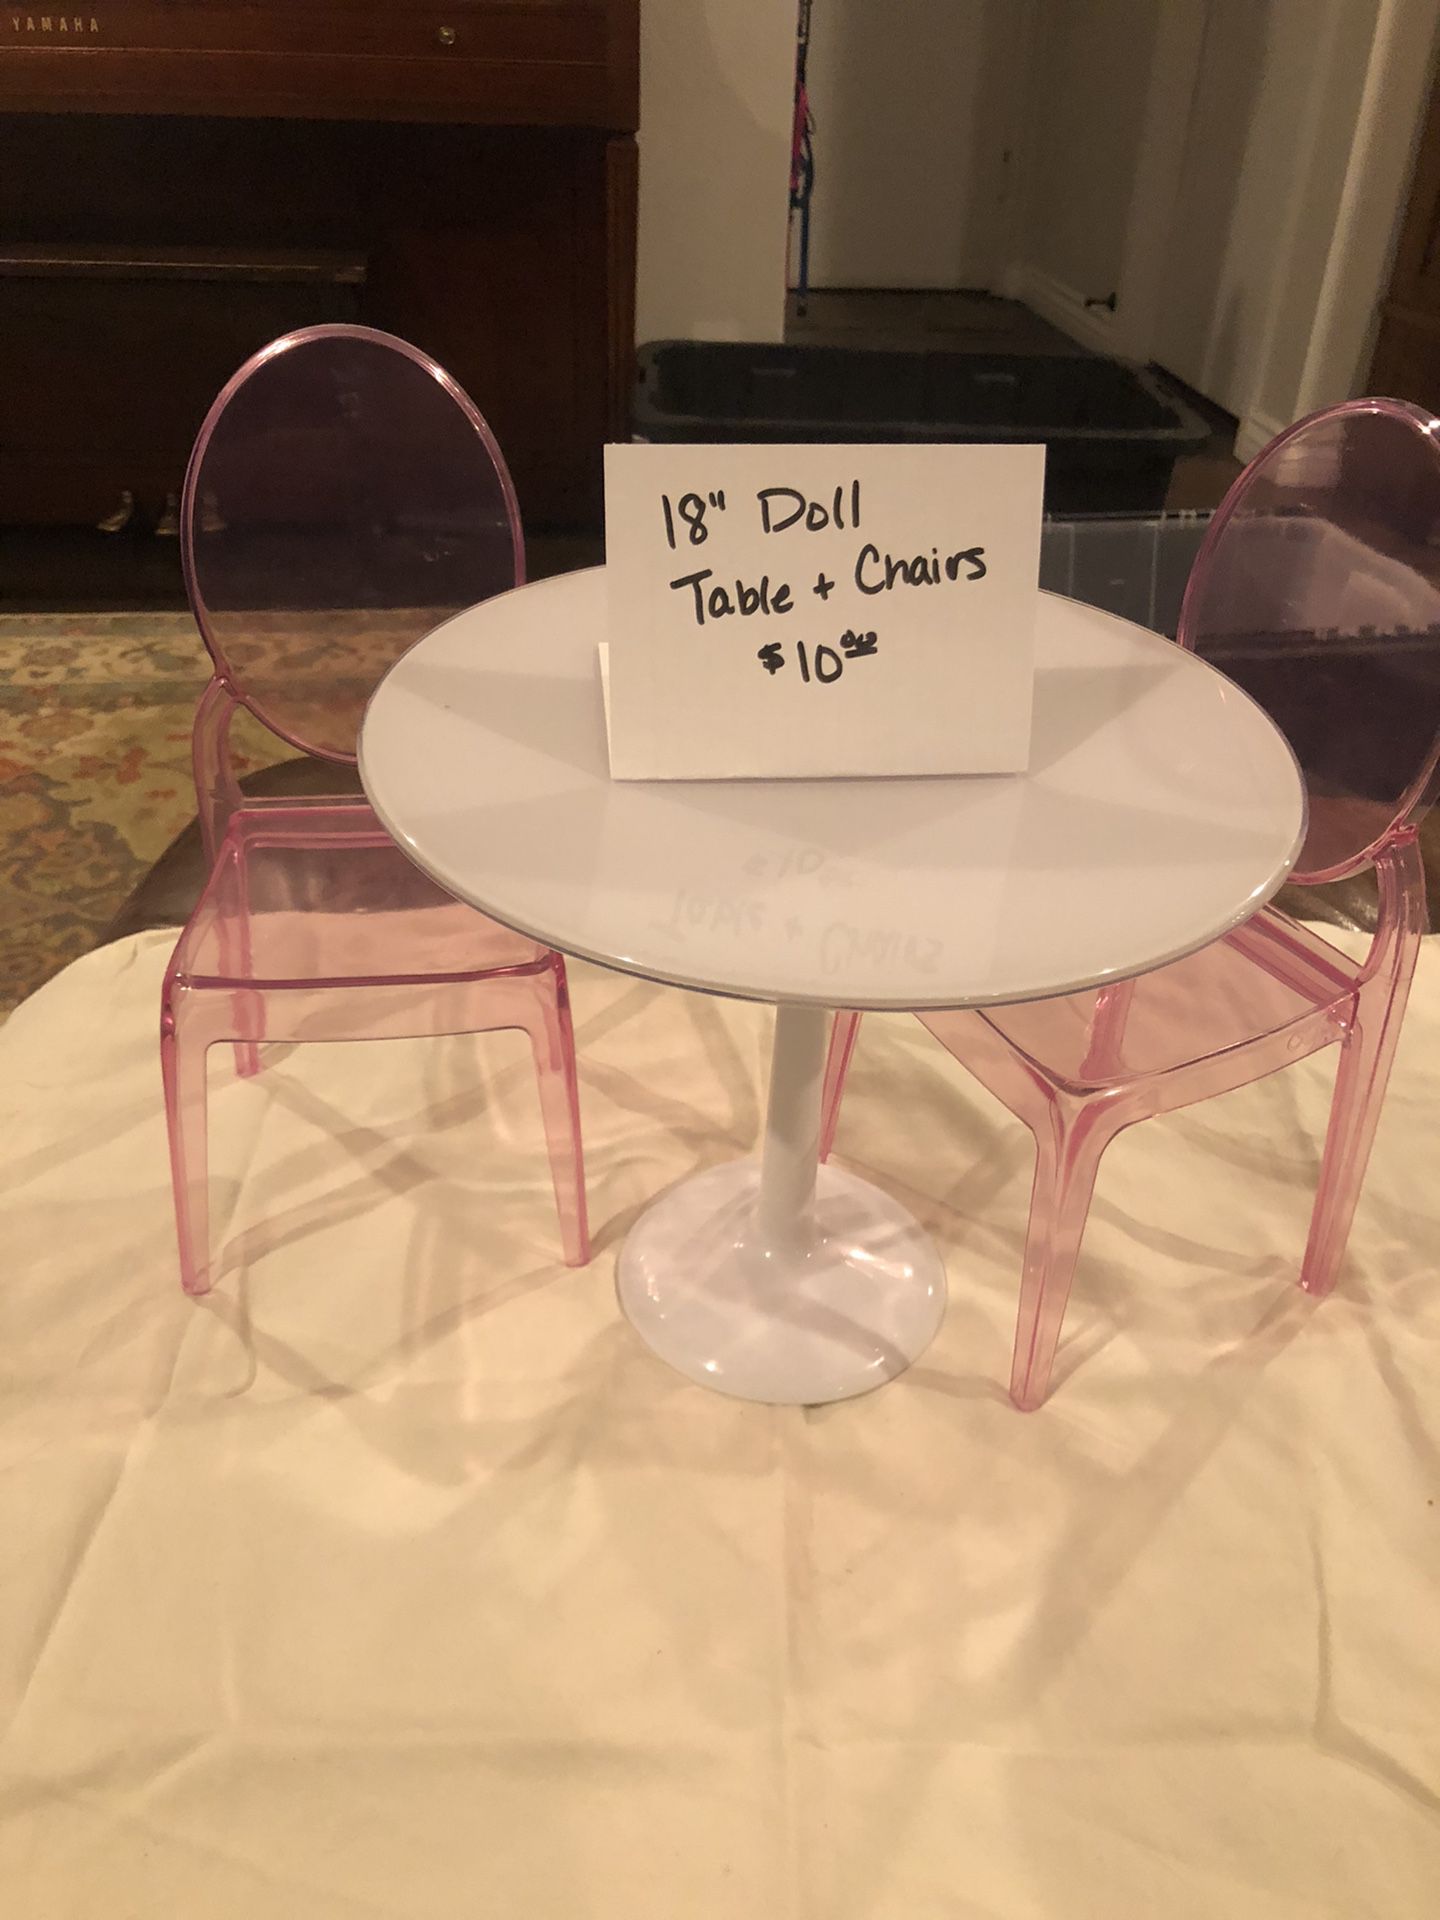 18” Doll Table and chairs